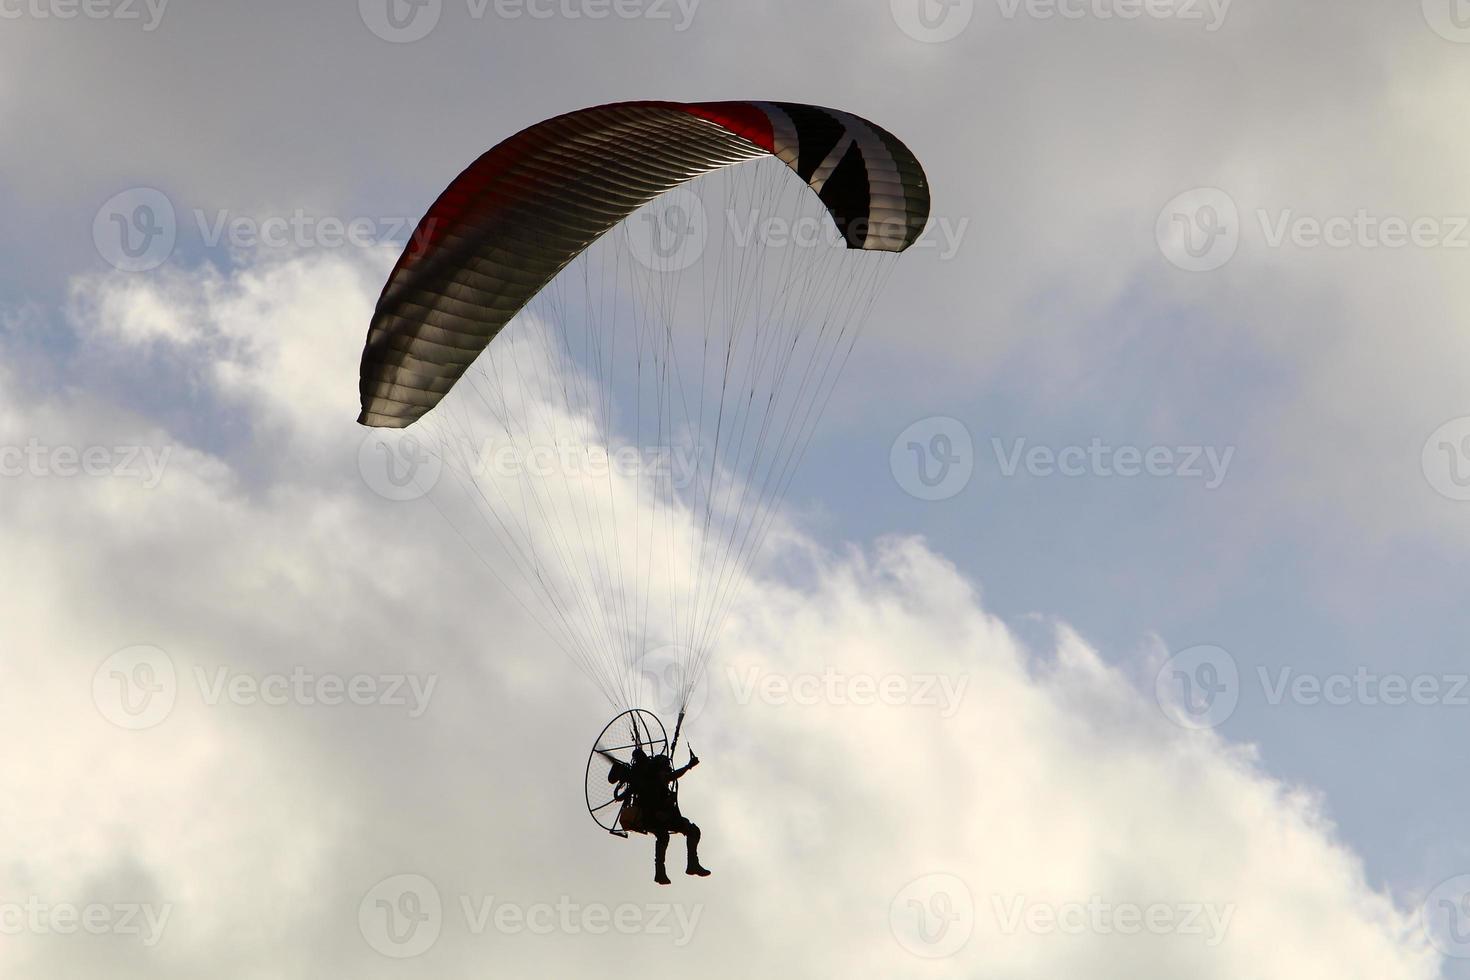 Paragliding in the sky over the Mediterranean Sea. photo